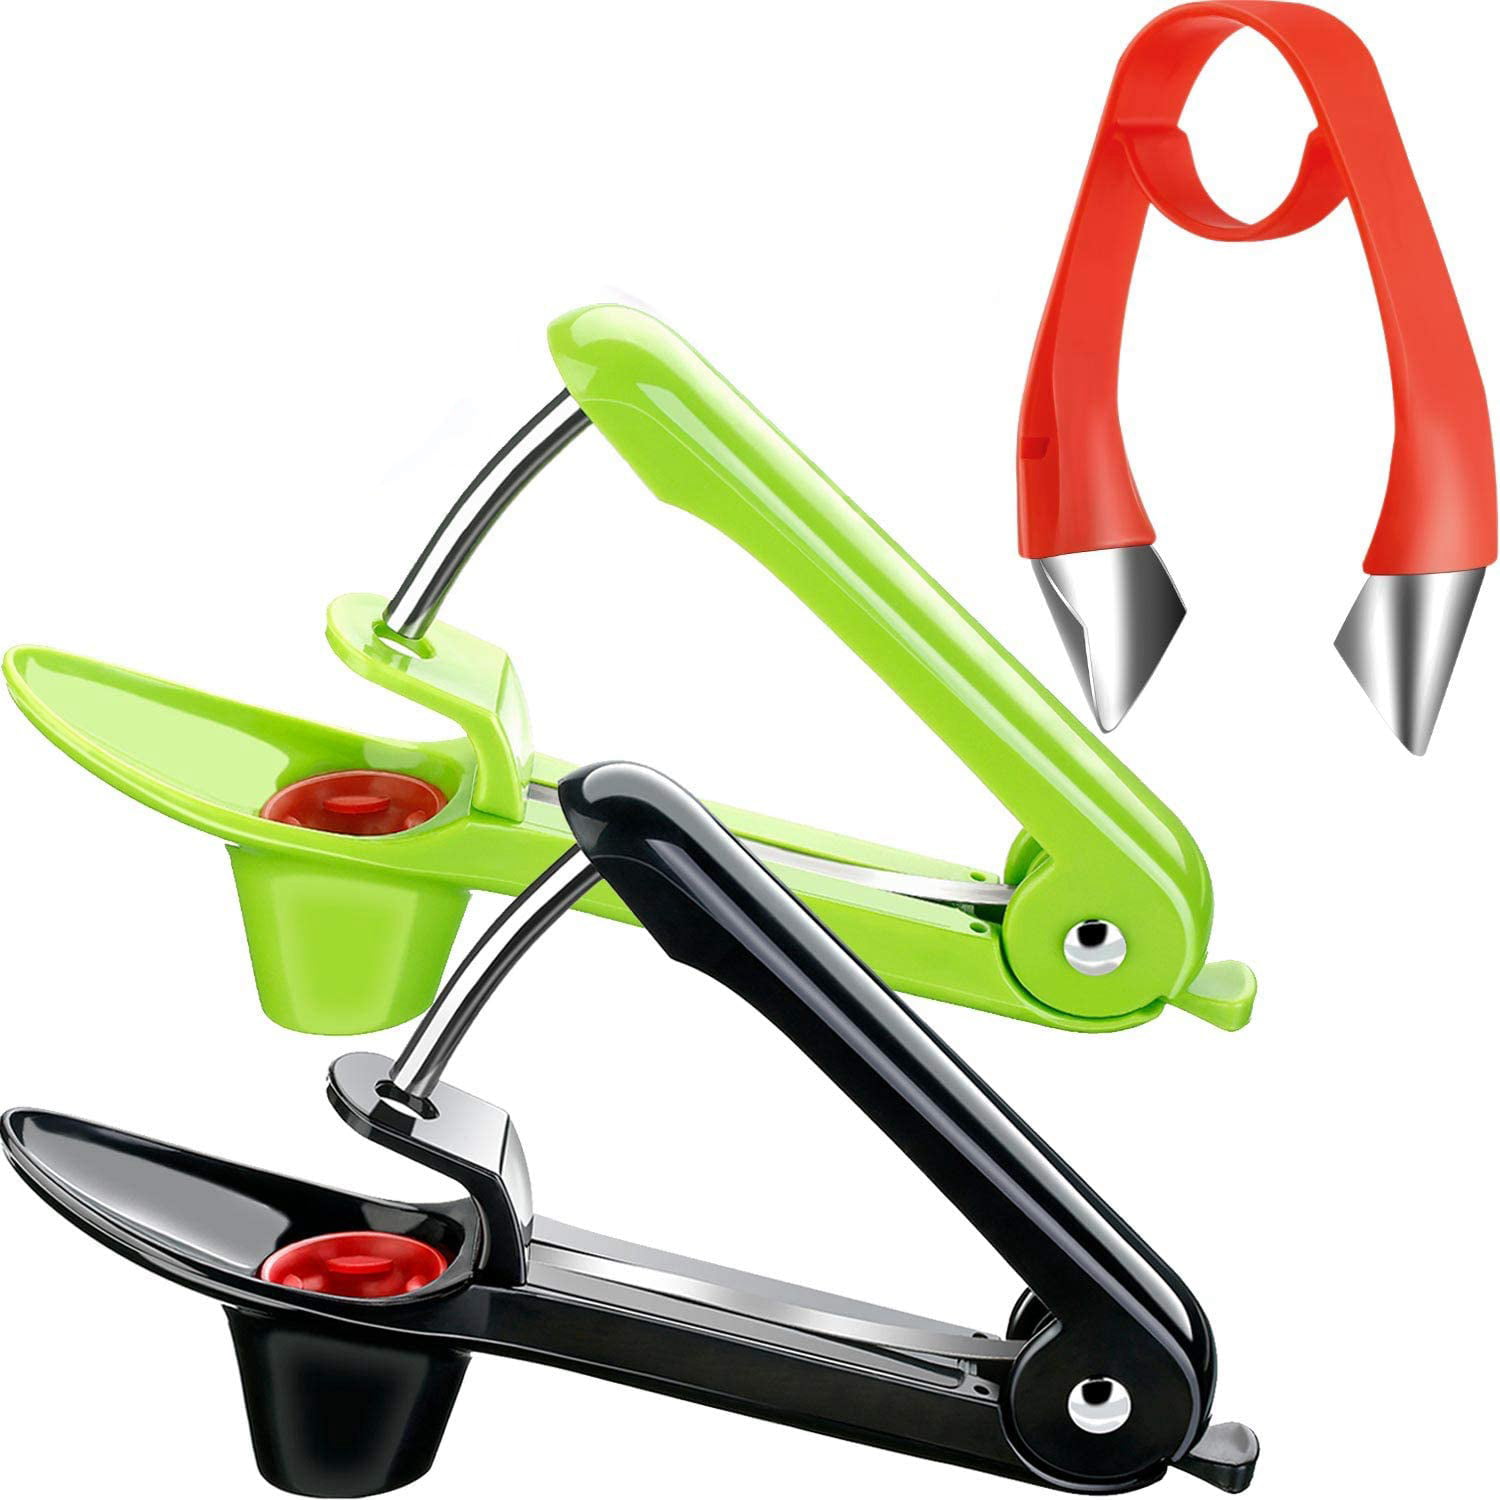 2 Pieces Cherry Pitter Remover Handheld Cherry Pitter Stoner and Strawberry Stem Remover Strawberry Huller for Cherry Strawberry Tomato Pineapple and More Fruits 